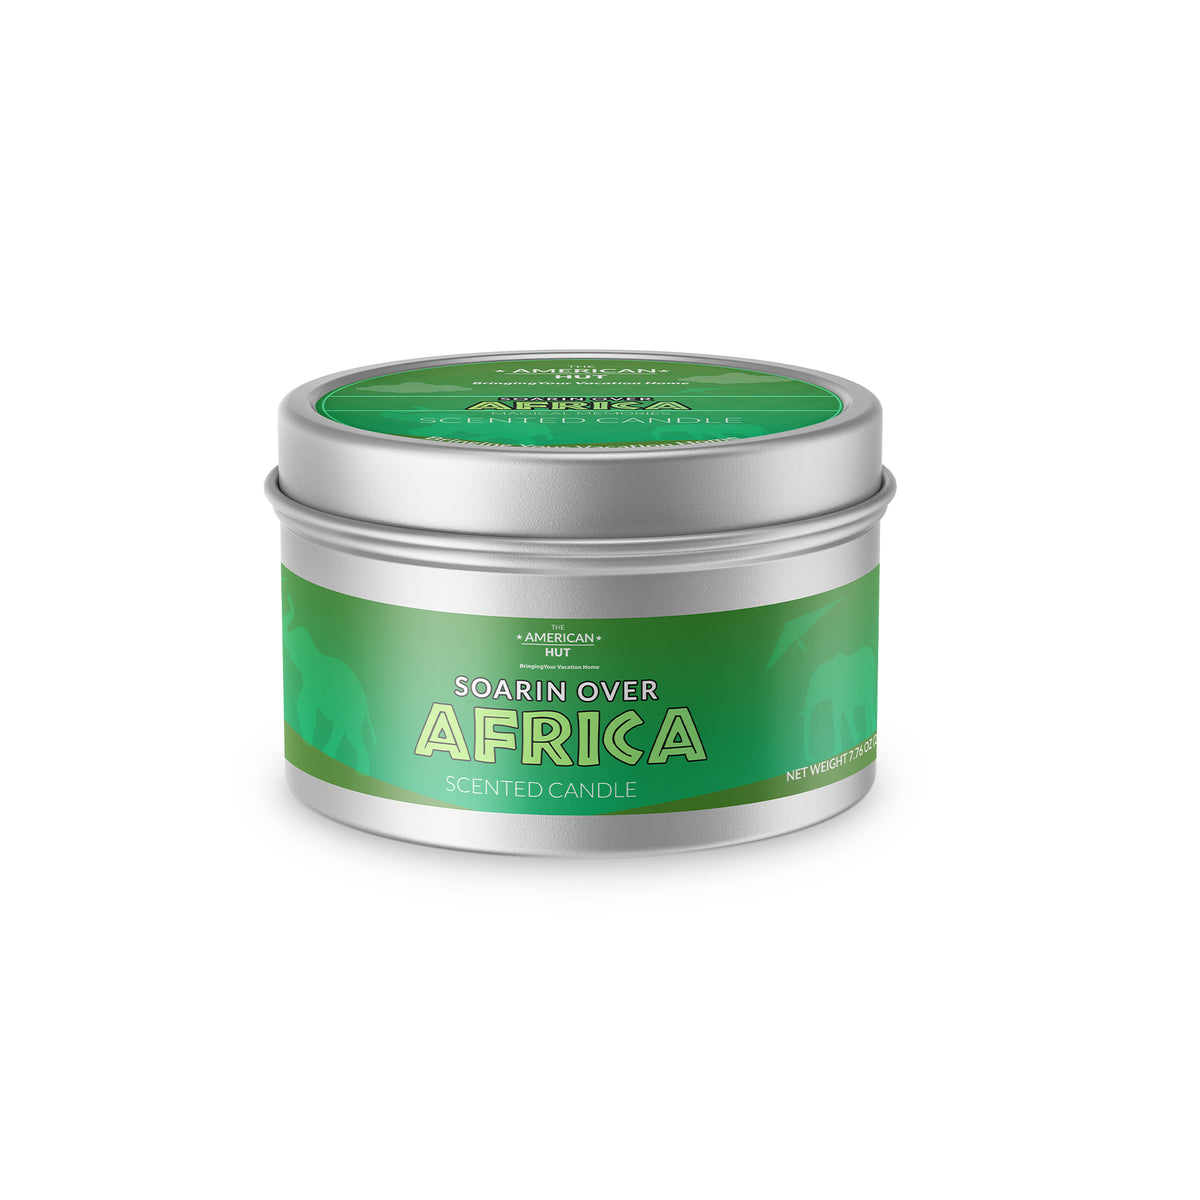 Soarin Over Africa - Tin Candle with crackling wooden wick